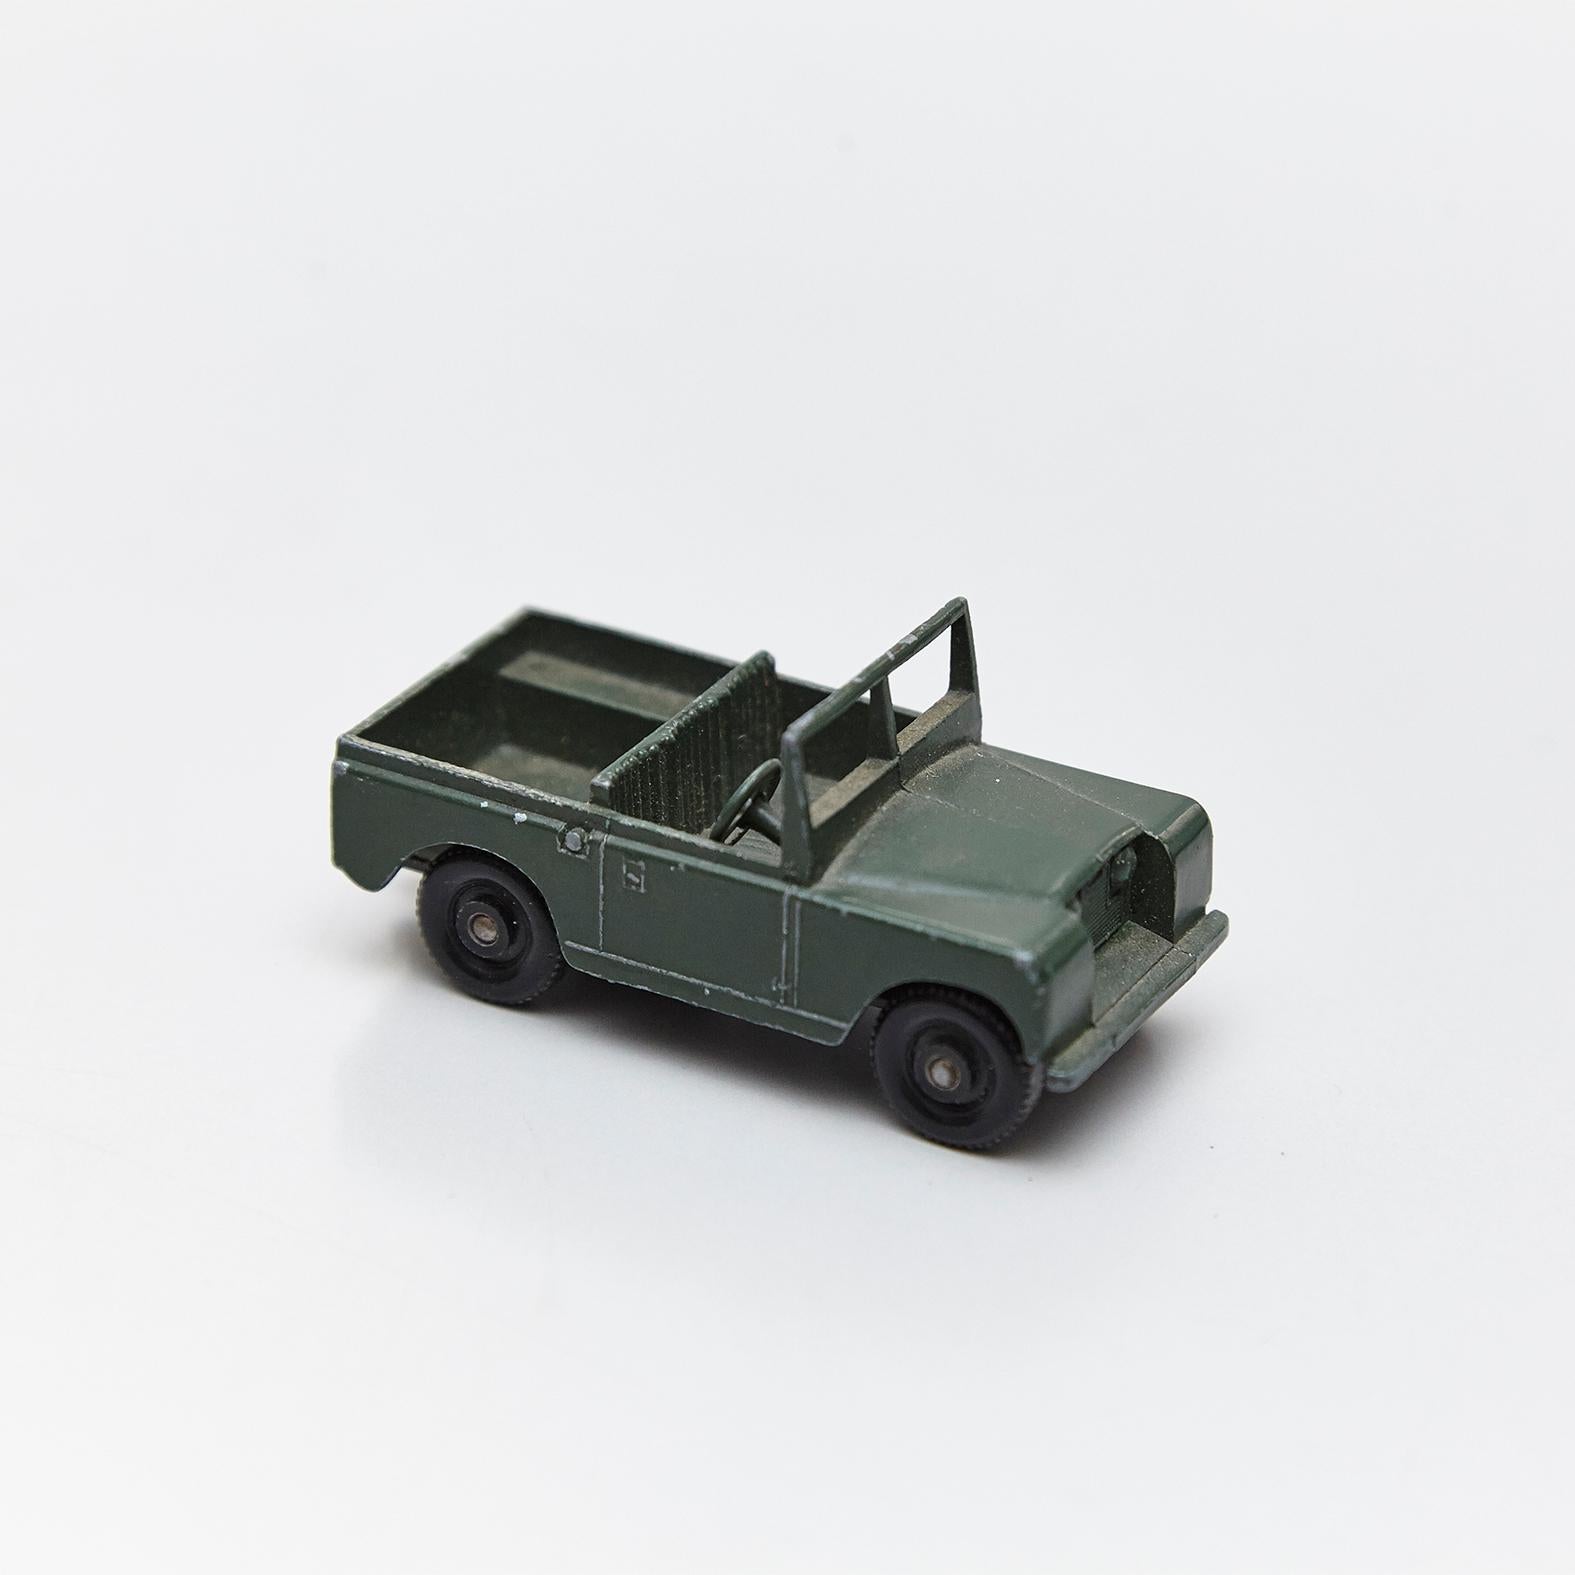 Lesney Matchboxes Series Antique Metal Toy Cars Green Military - Free Shipping 1